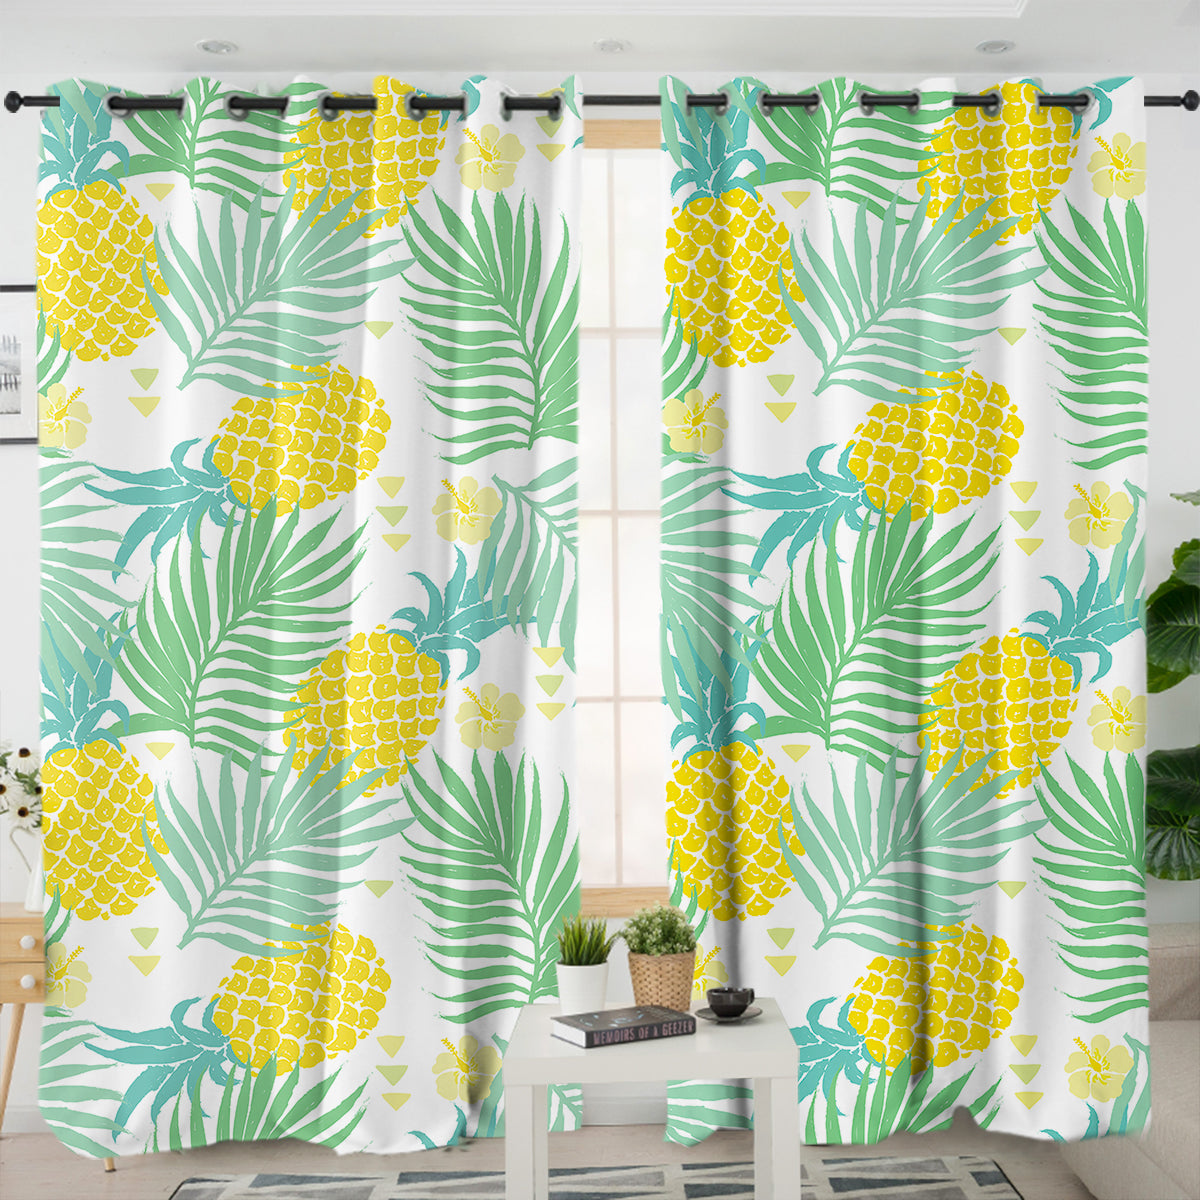 Pineapple Delight Curtains